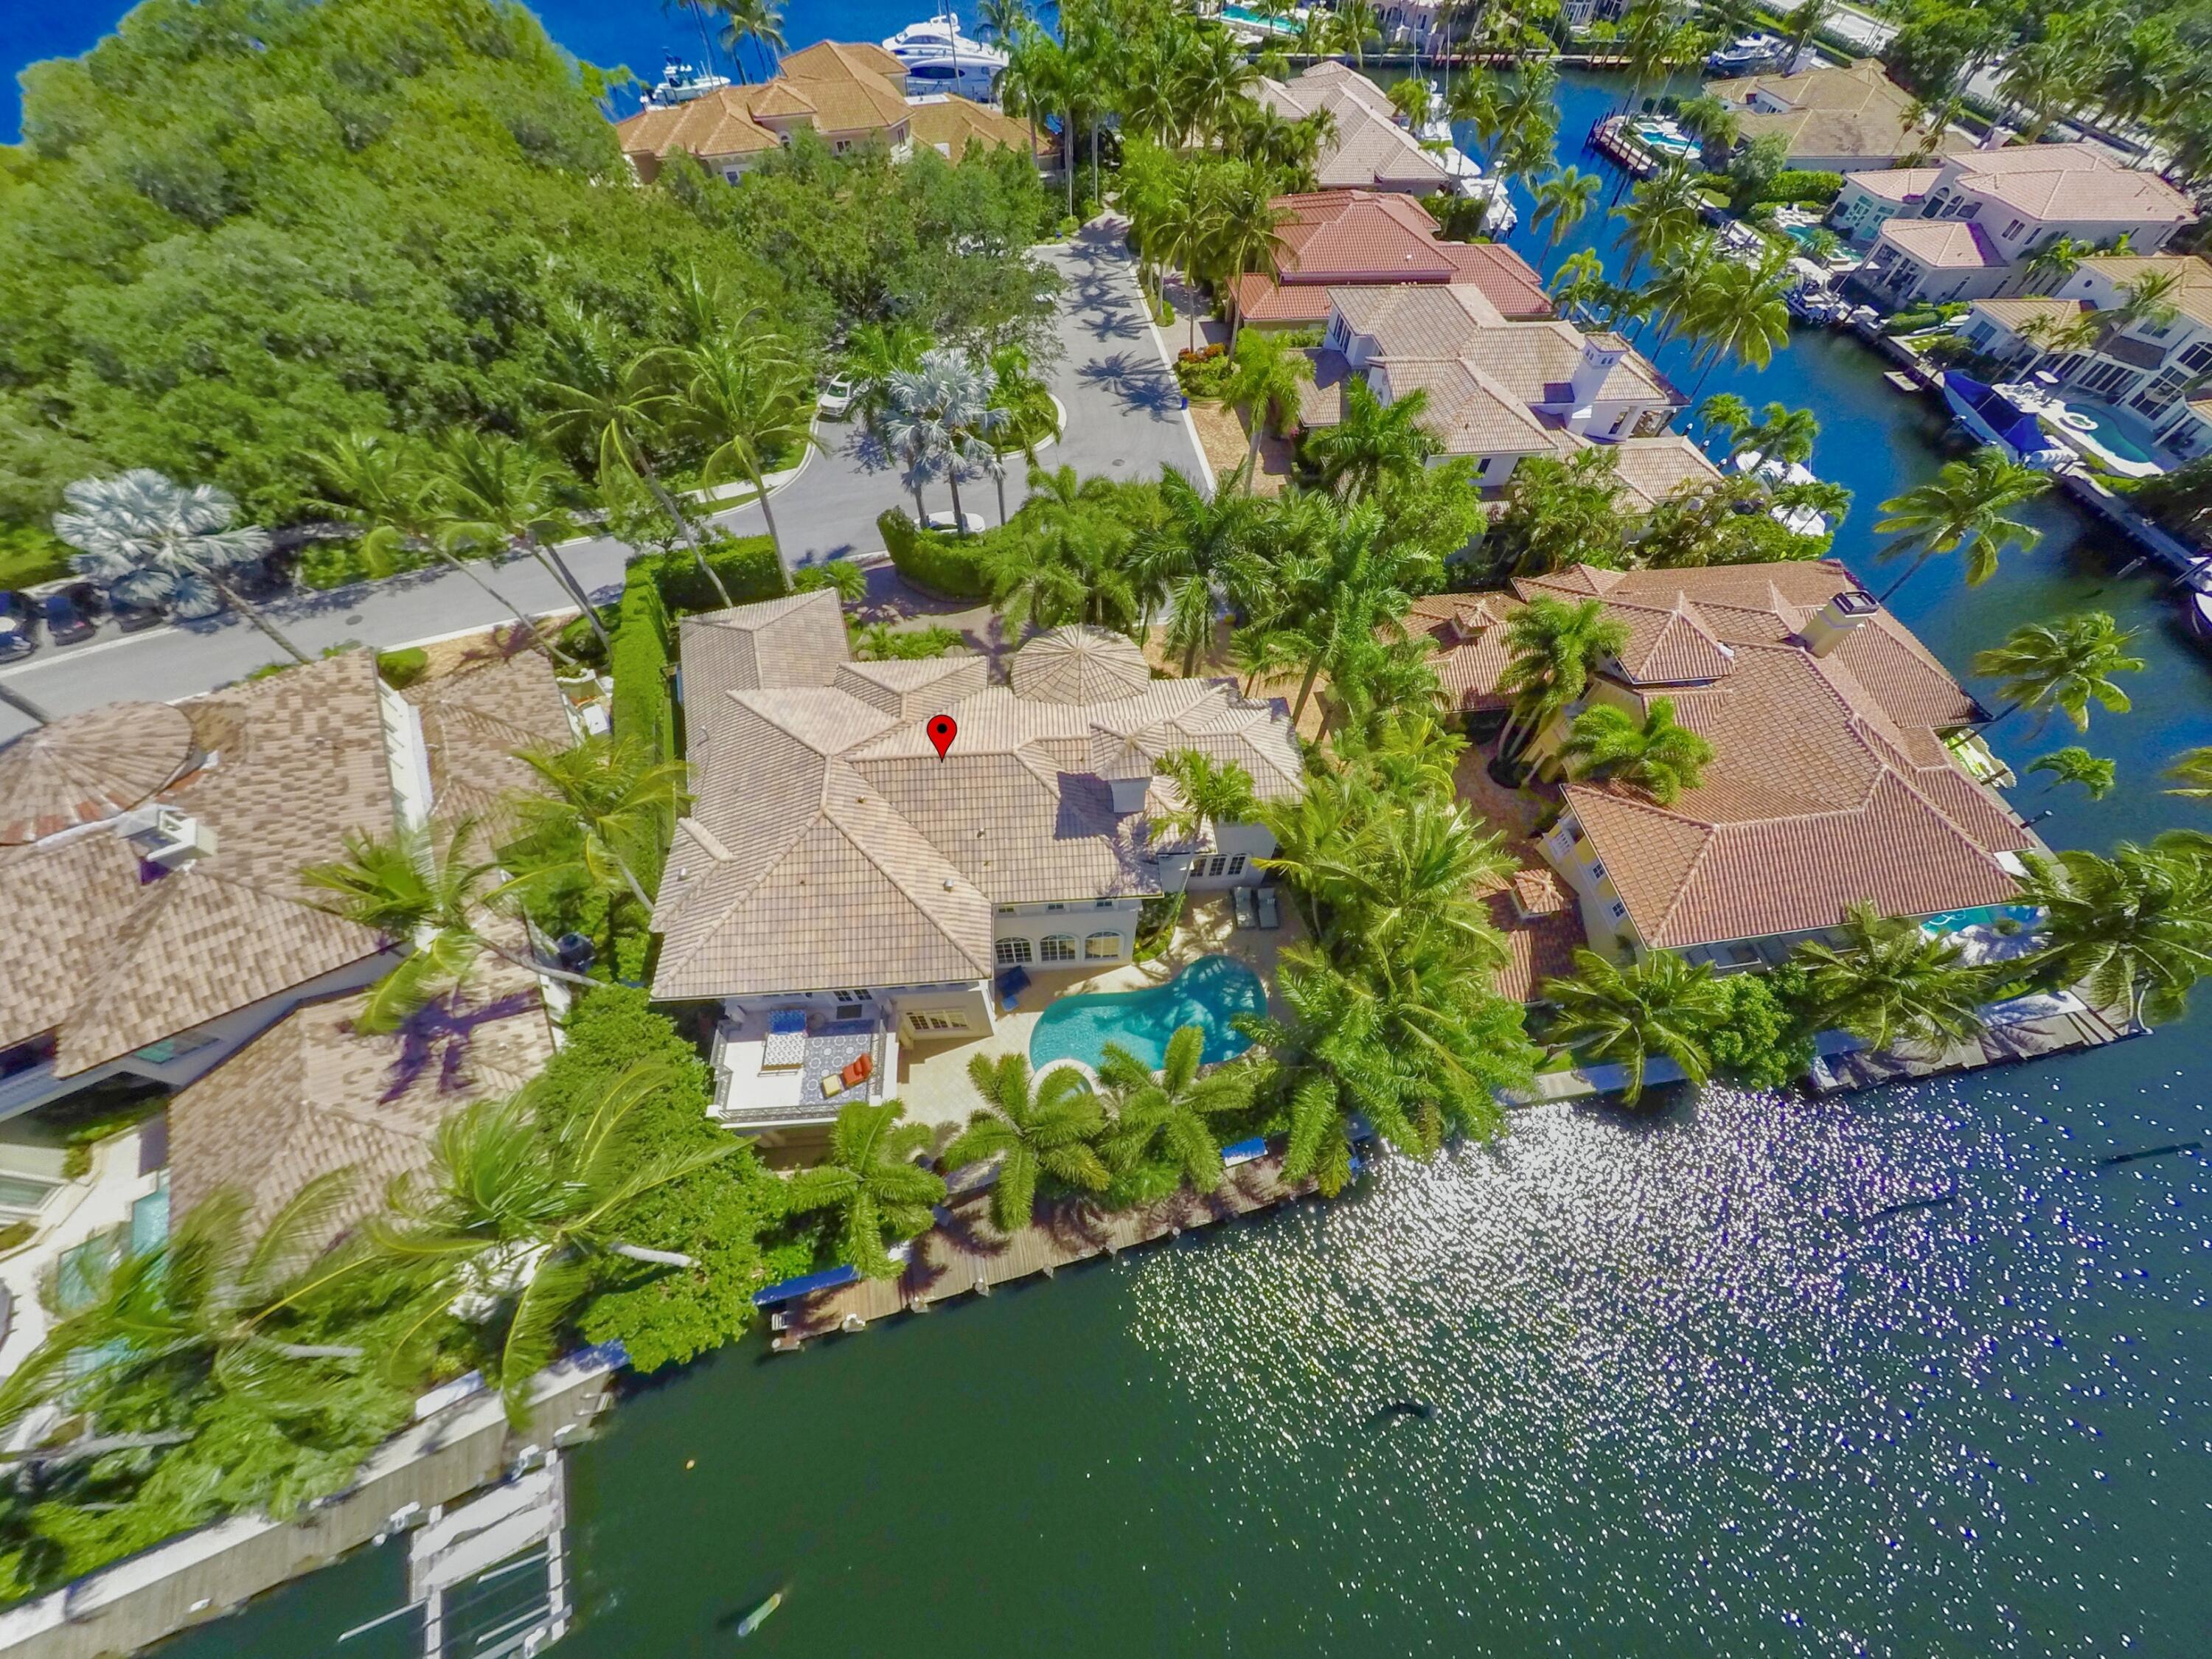 Prestigious Harbour Isles, a manned gated 24/7 waterfront community sits along the Intracoastal & NPB waterway, your passageway to Atlantic Ocean.  93' waterfront, 75' dock w/jet ski lift/water/electric, and heated saltwater pool & spa.  Precision detailing throughout.  Incredible Primary Suite is amazing w/Open Water Views from large balcony, huge walk-in closet w/2nd laundry, separate luxurious marble, his and her full baths.  This perfect home boast 5 Ensuites, 6 1/2 baths, marble travertine floors, elevator, 3-car garage w/oversized doors, 50KW generator, Giga fiber, Mature Palm Beach Design landscaping and 21 steps to Nature Preserve w/Gazebo.  From the moment you enter this home, it impresses you with grand architecture (Randall Stofft) & landscaped privacy. Will consider Bitcoin.